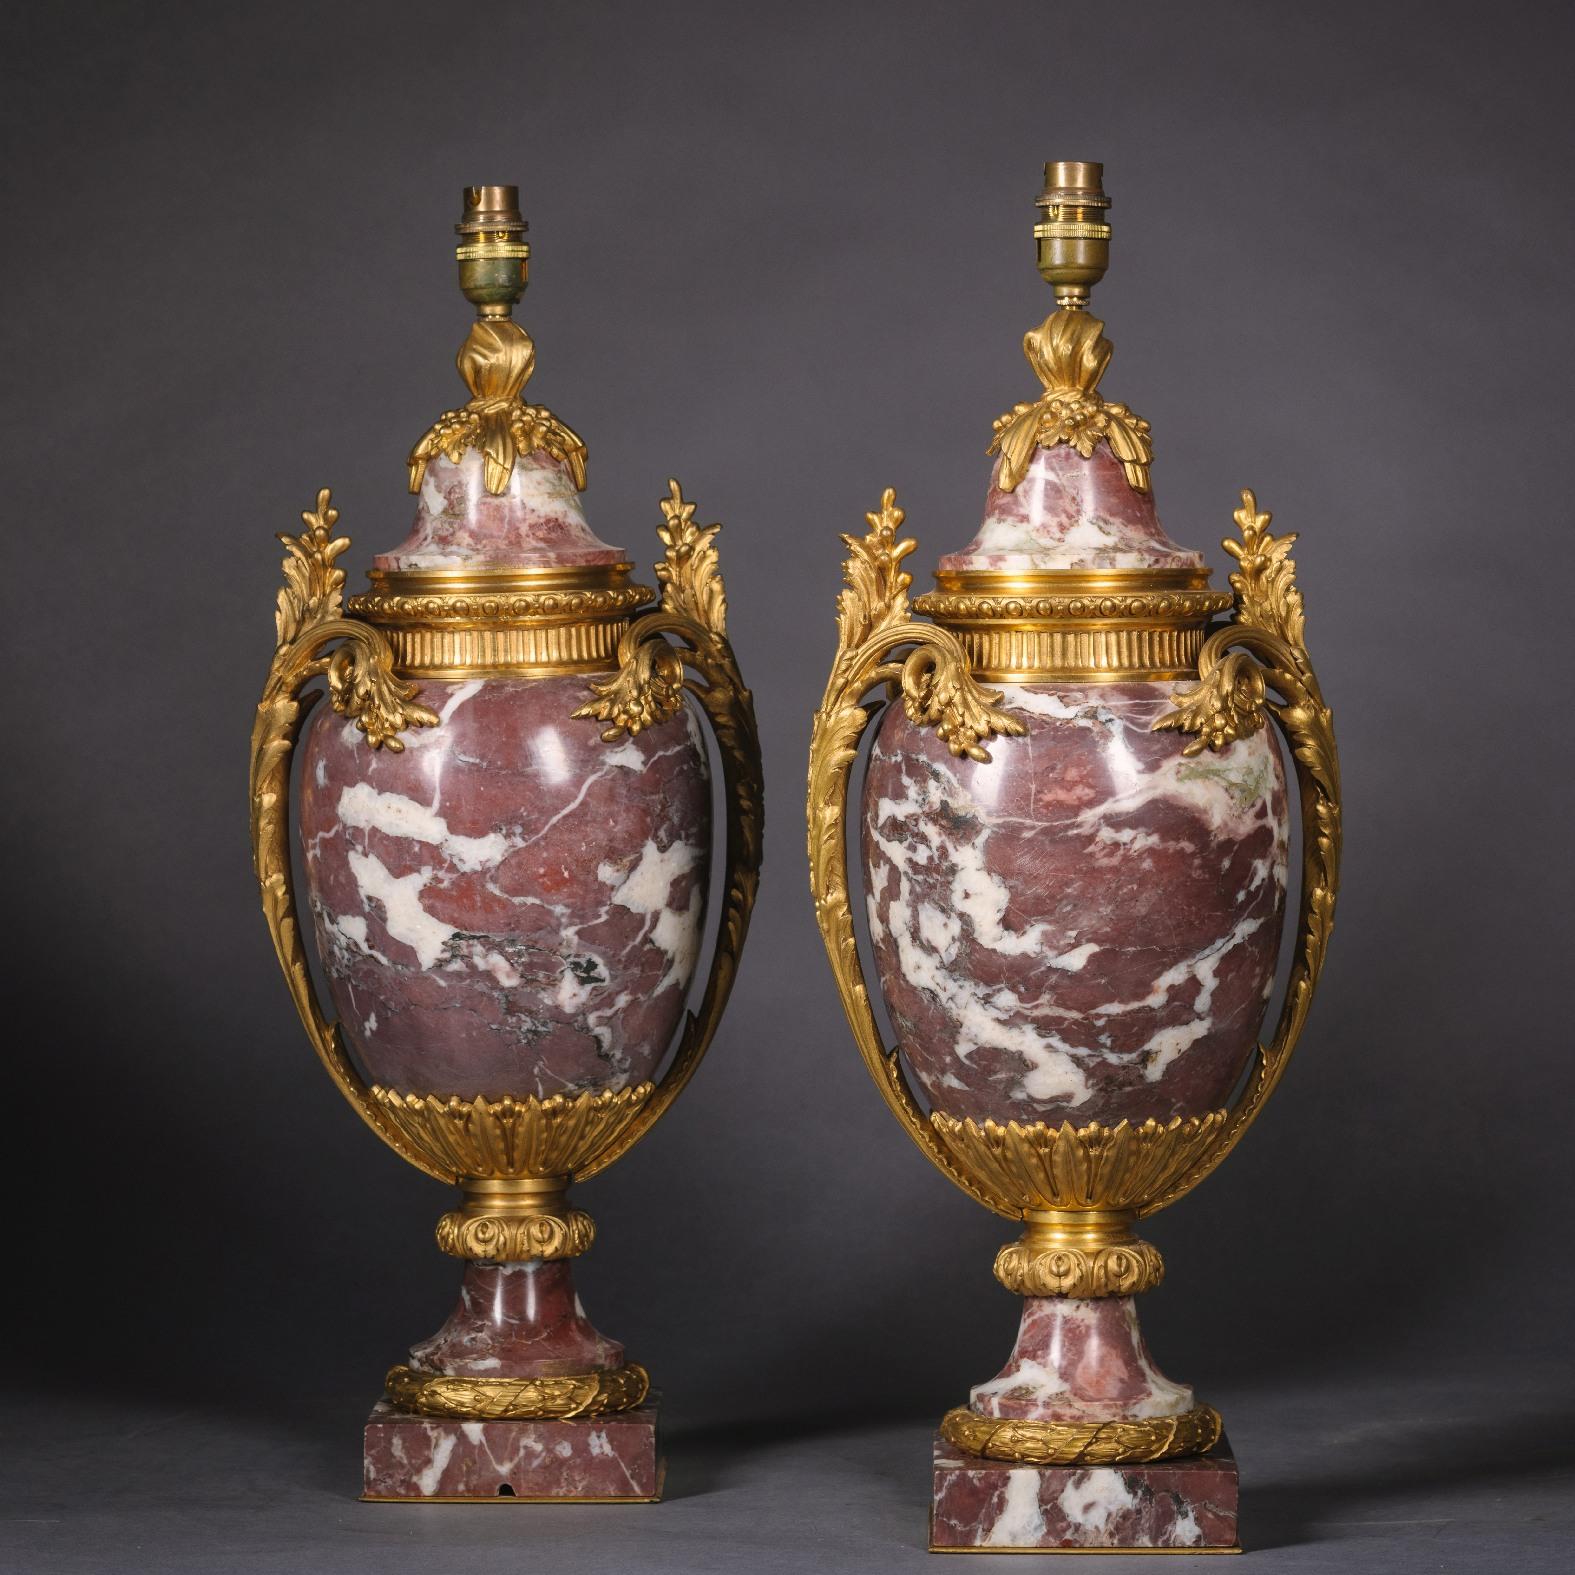 A pair of Louis XVI style gilt-bronze mounted fleur de pêcher marble vases, now mounted as lamps. 

The body of each vase is of ovoid shape with a fluted gilt-bronze collar and domed top with berried finial and scrolling and fronded acanthus cast